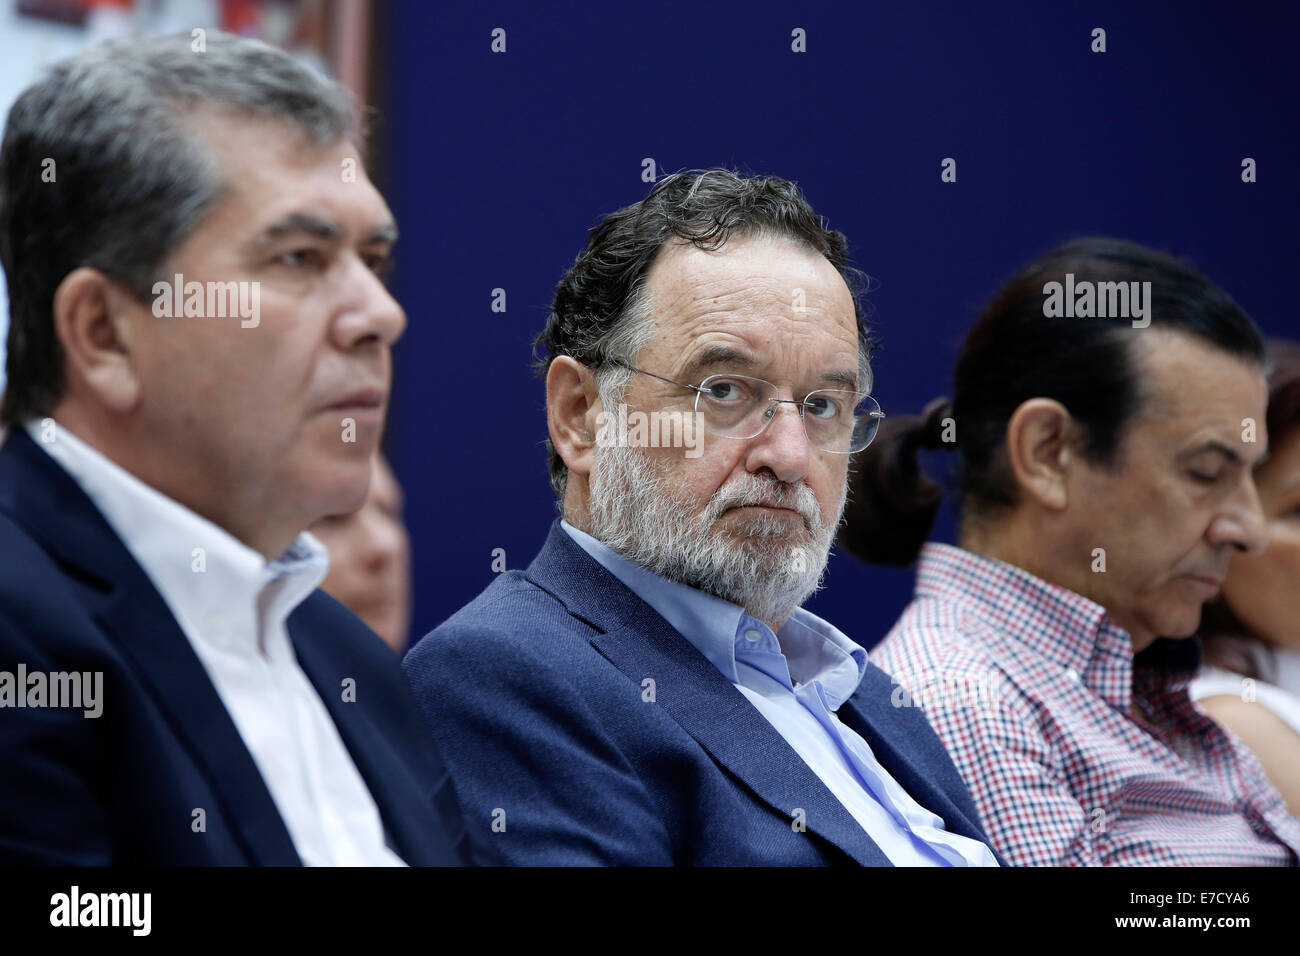 Thessaloniki, Greece, 13th September, 2014. Leader of the Greek Opposition party SYRIZA Alexis Tsipras delivers a press conference during his visit to the 79th TIF. Thessaloniki, Greece on September 13, 2014. Credit:  Konstantinos Tsakalidis/Alamy Live News Stock Photo